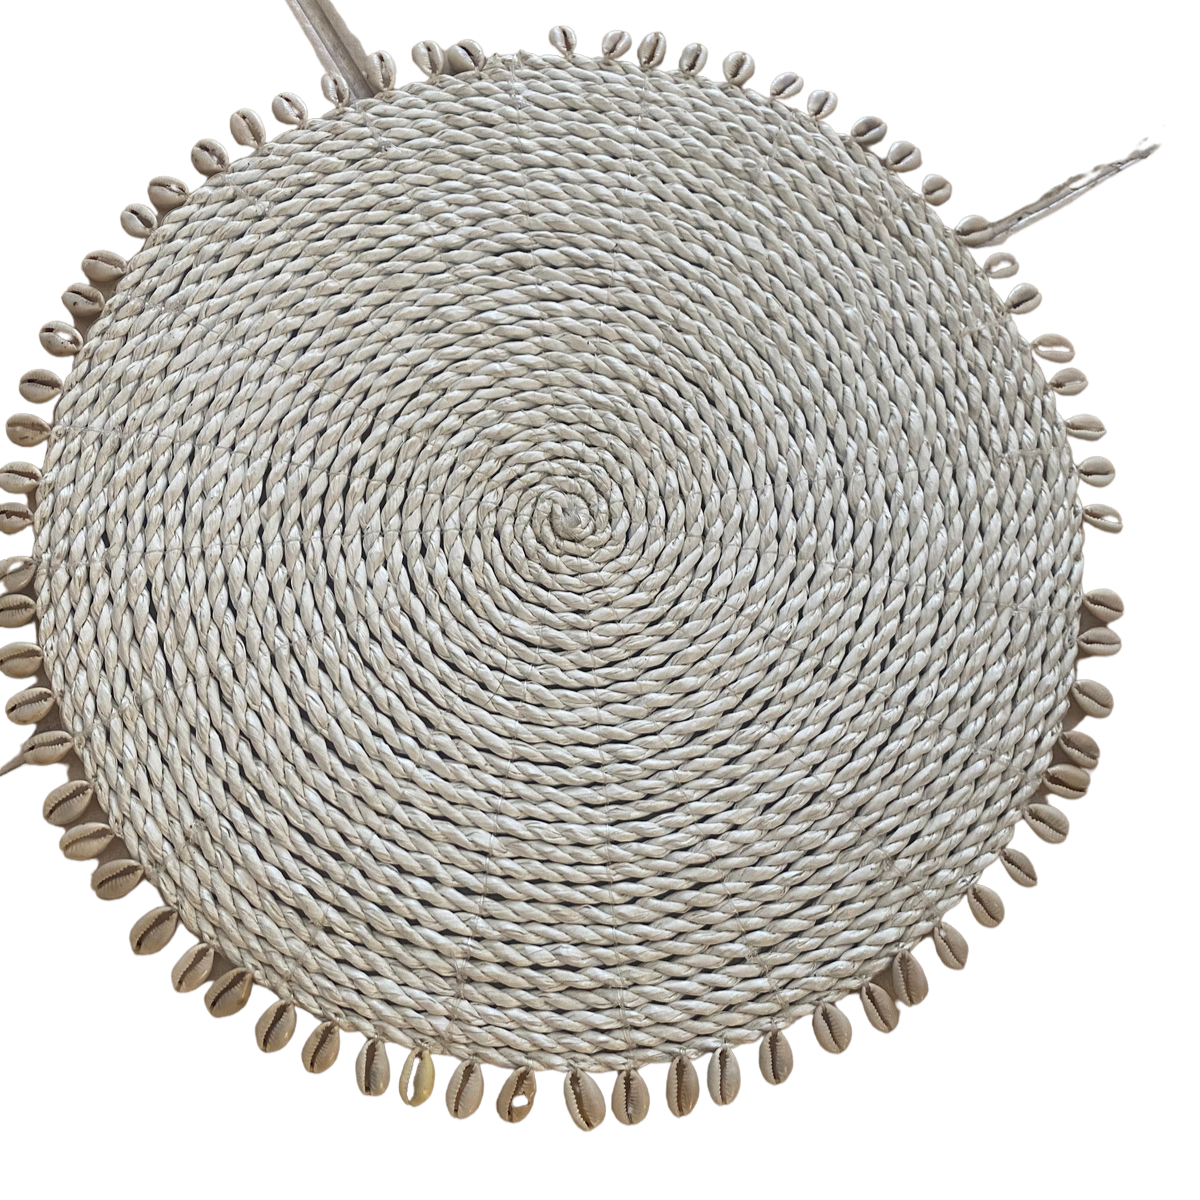 Rattan place mats with cowrie shells